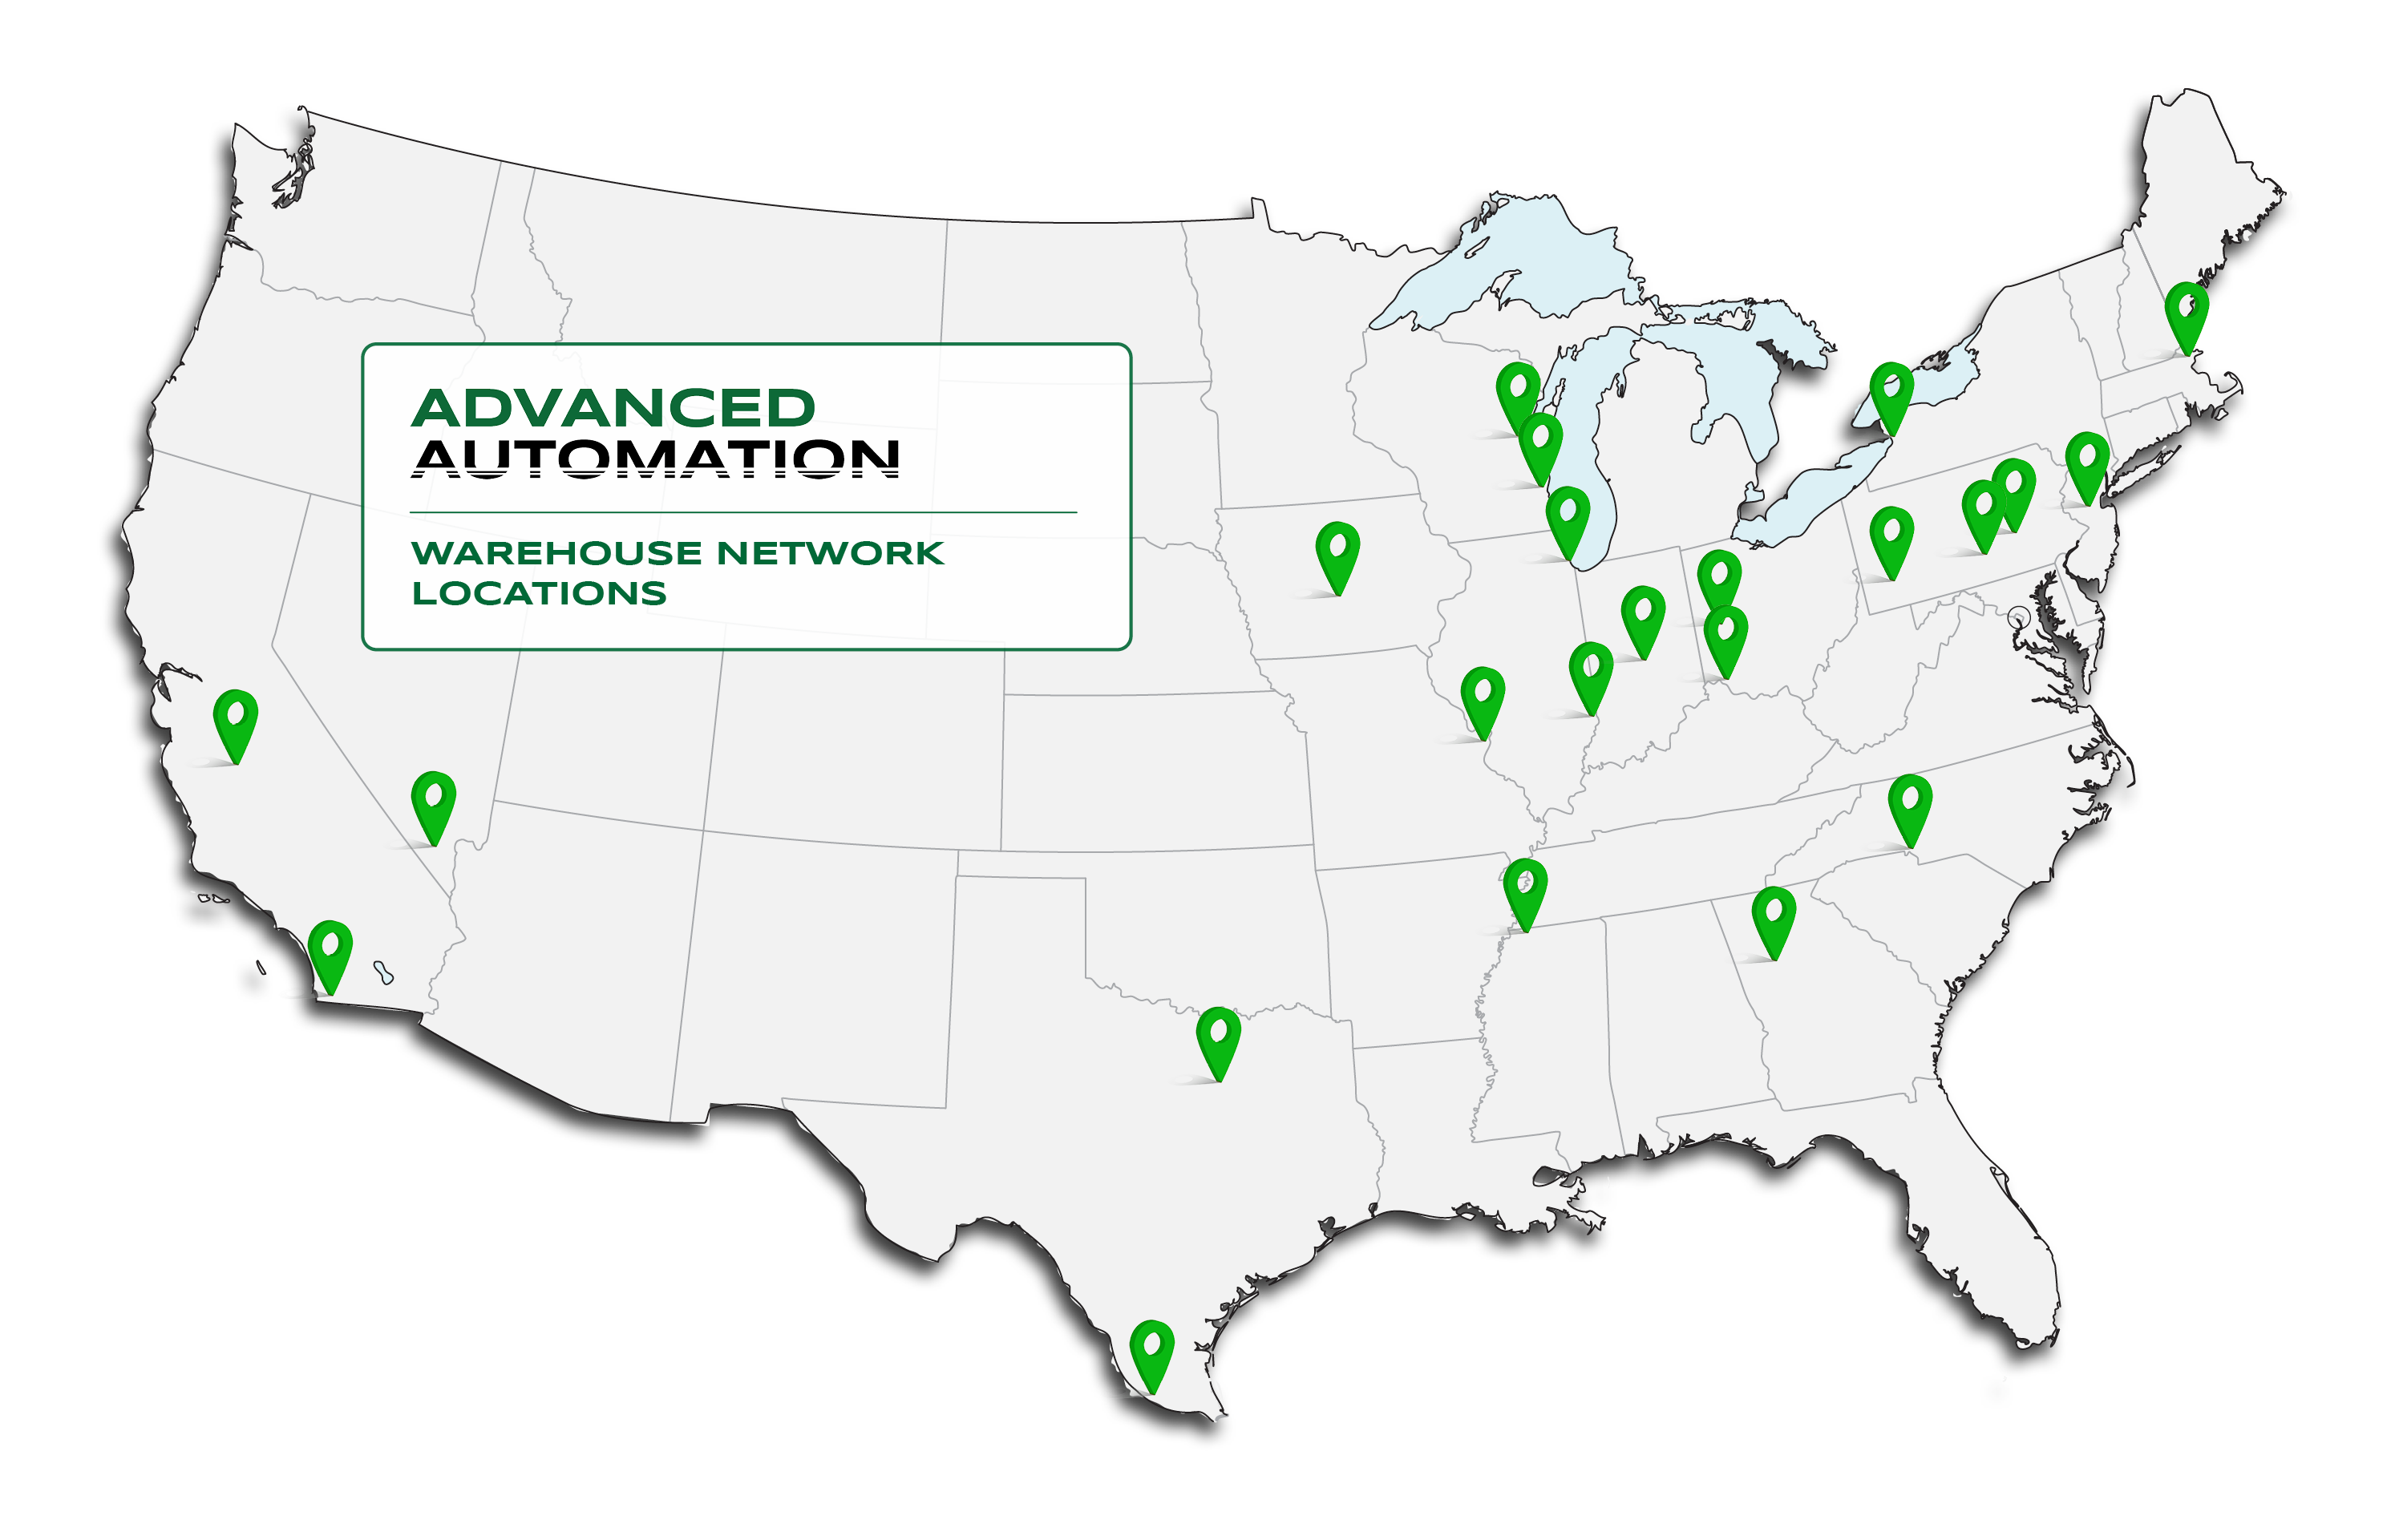 Map showing warehouse locations for Advanced Automation